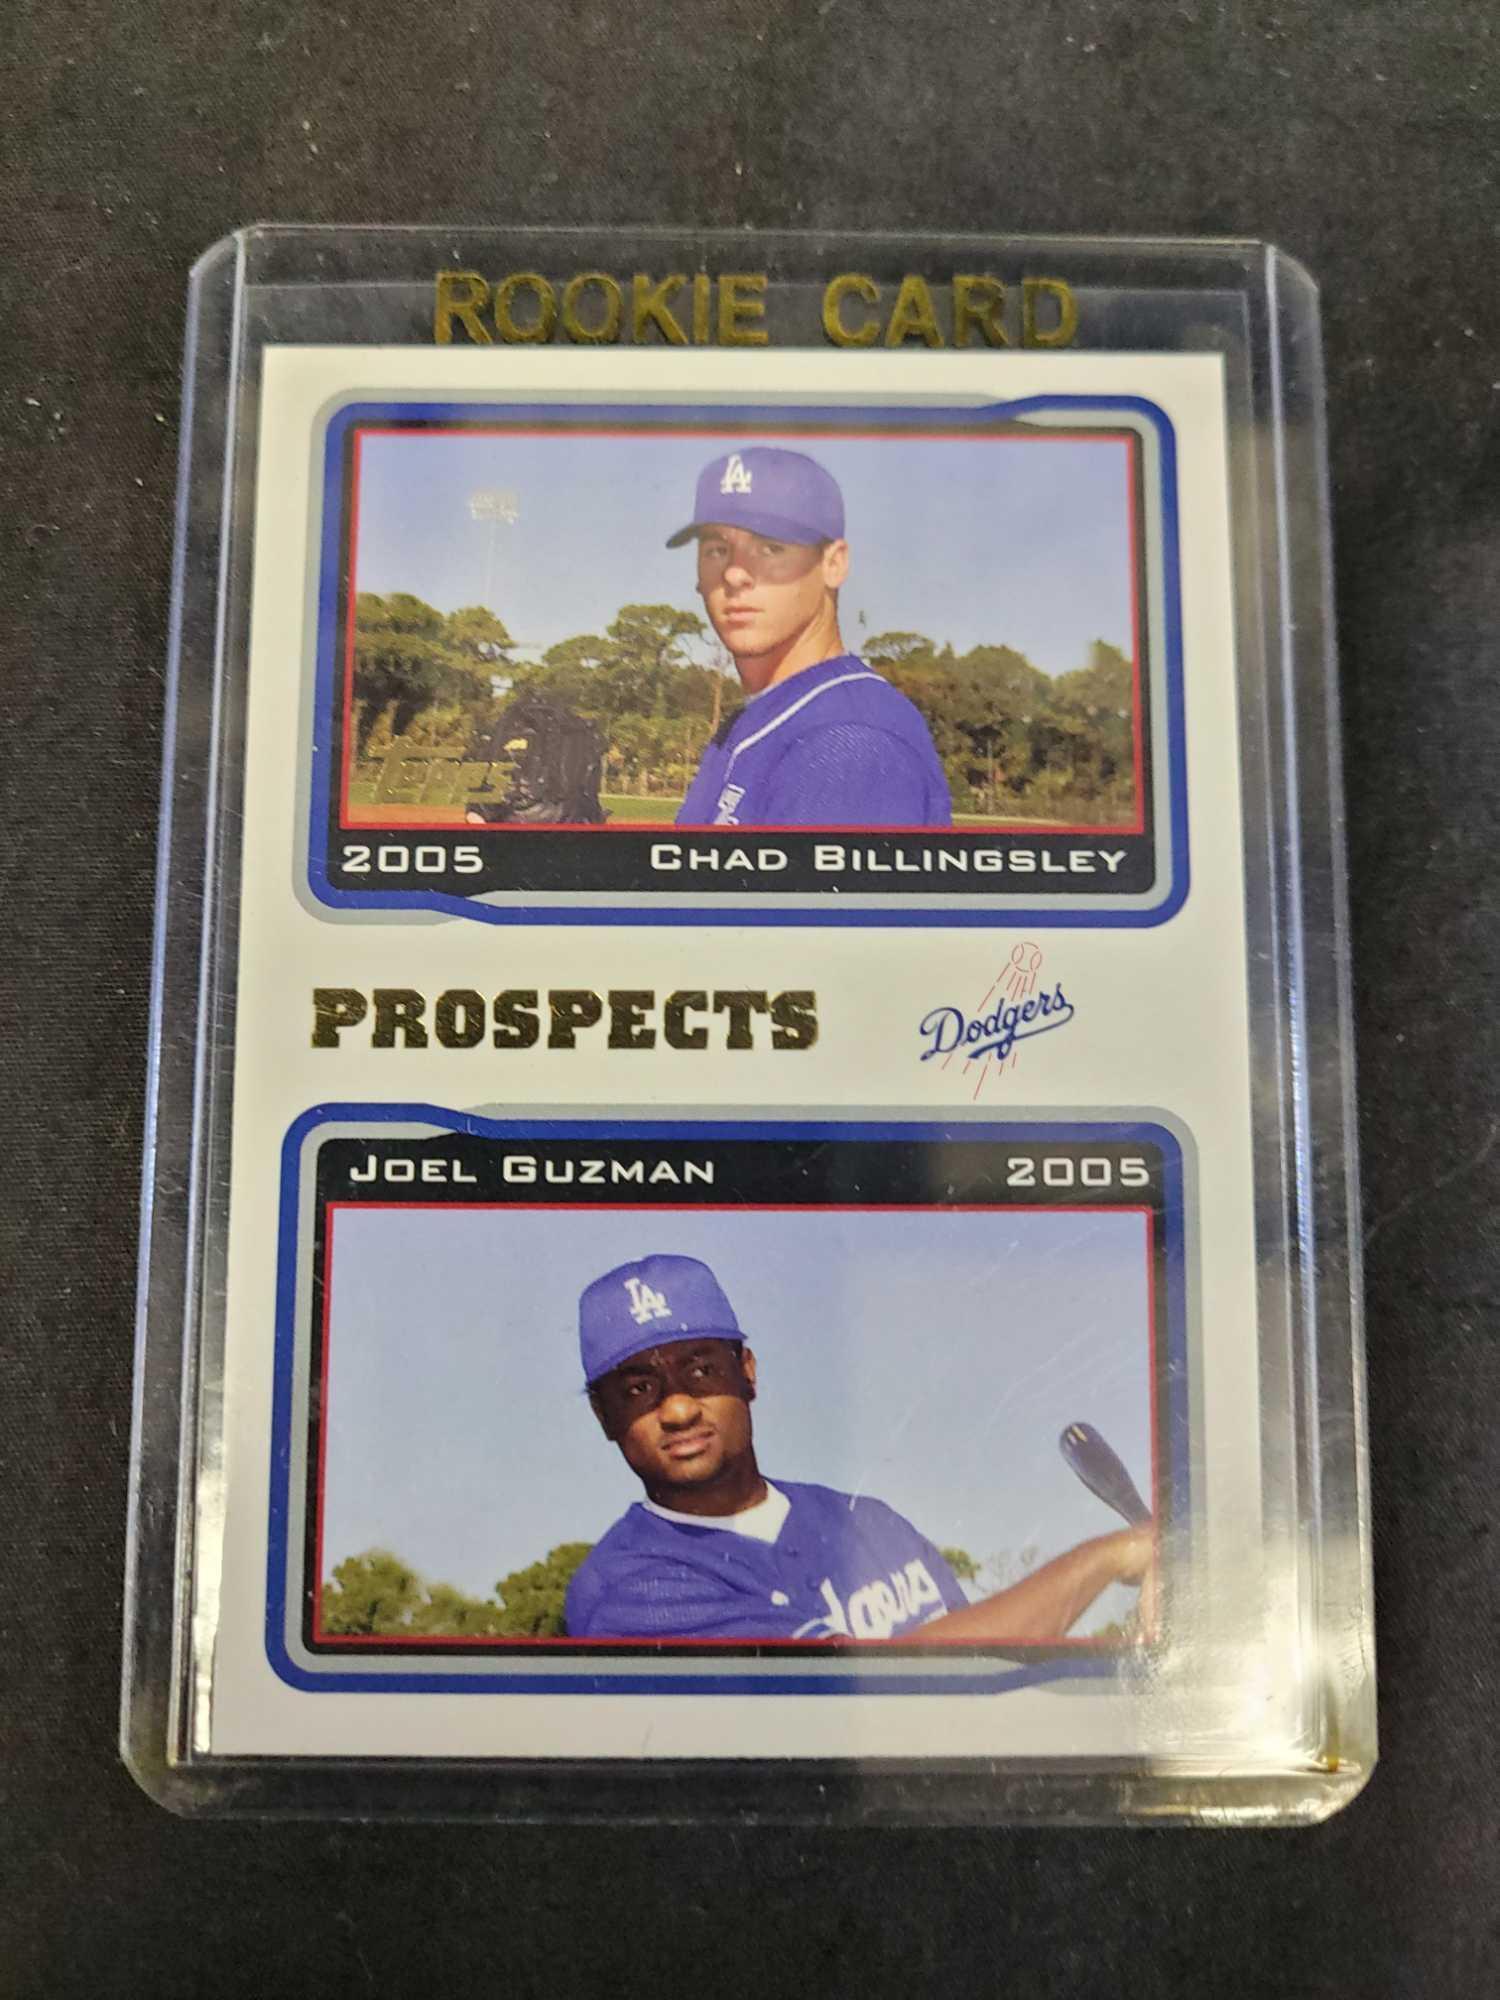 Topps 2000's Rookies and Numbered cards